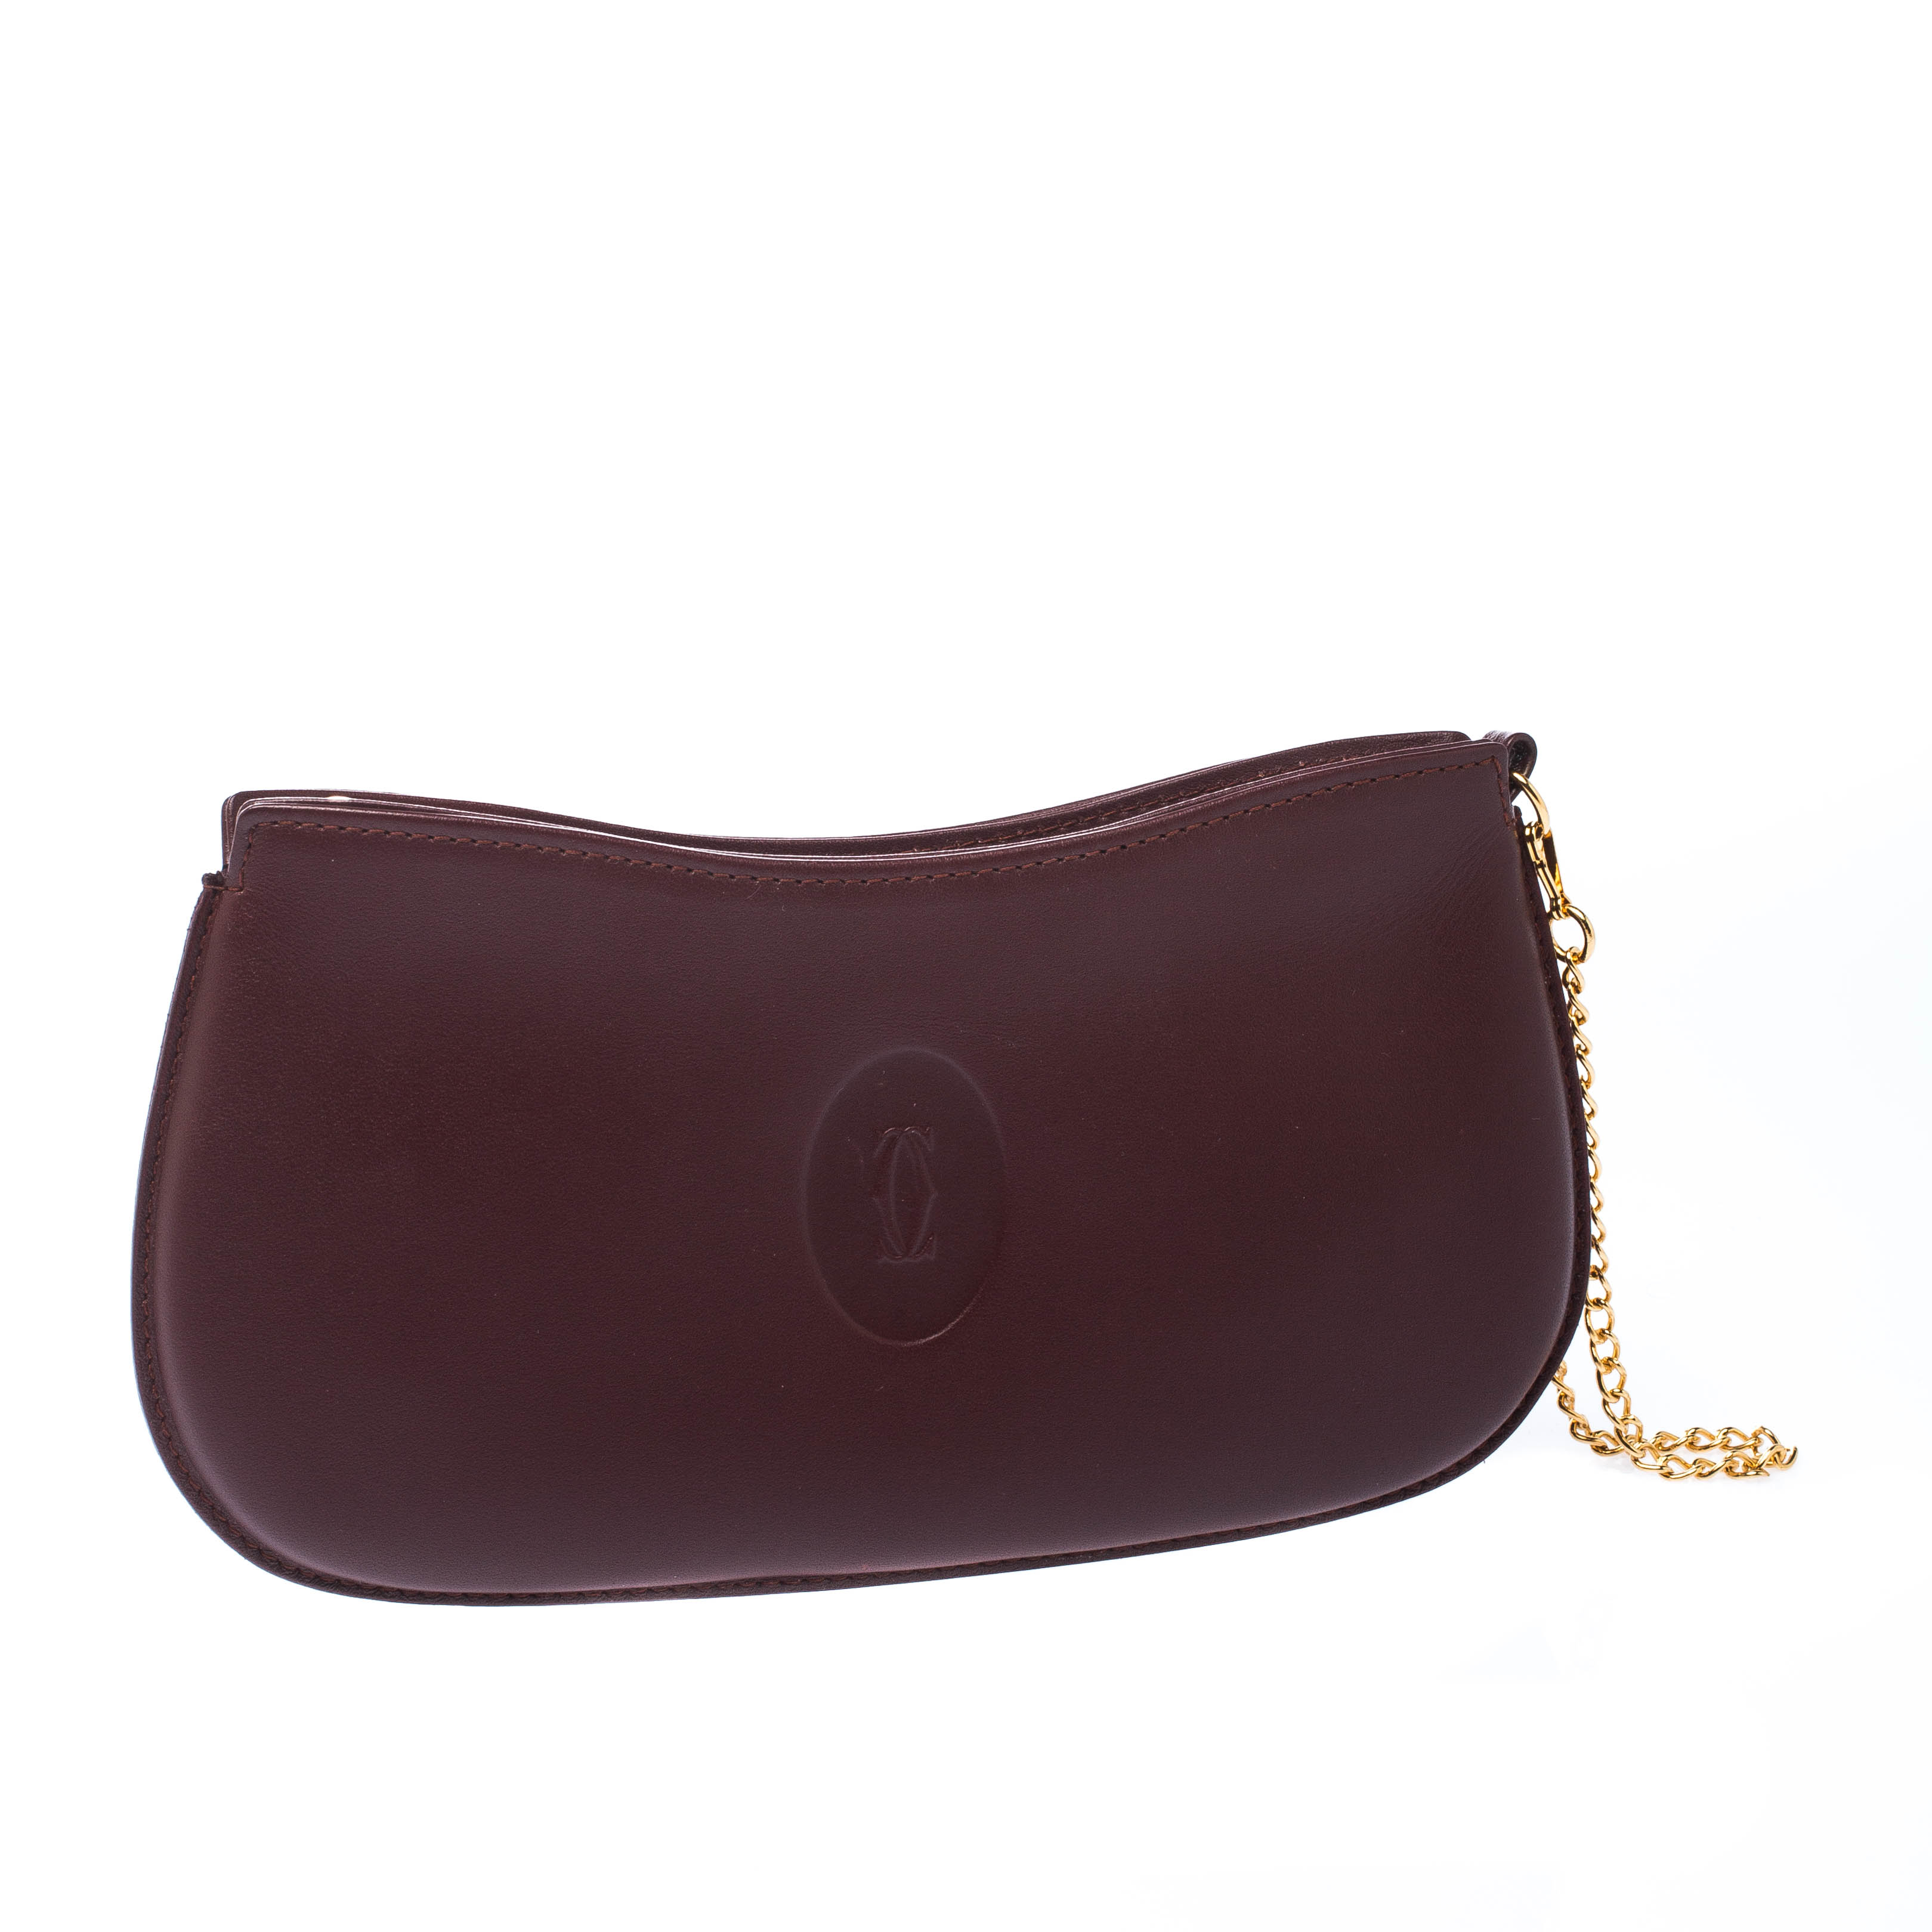 Cartier Burgundy Leather Toiletry Pouch 